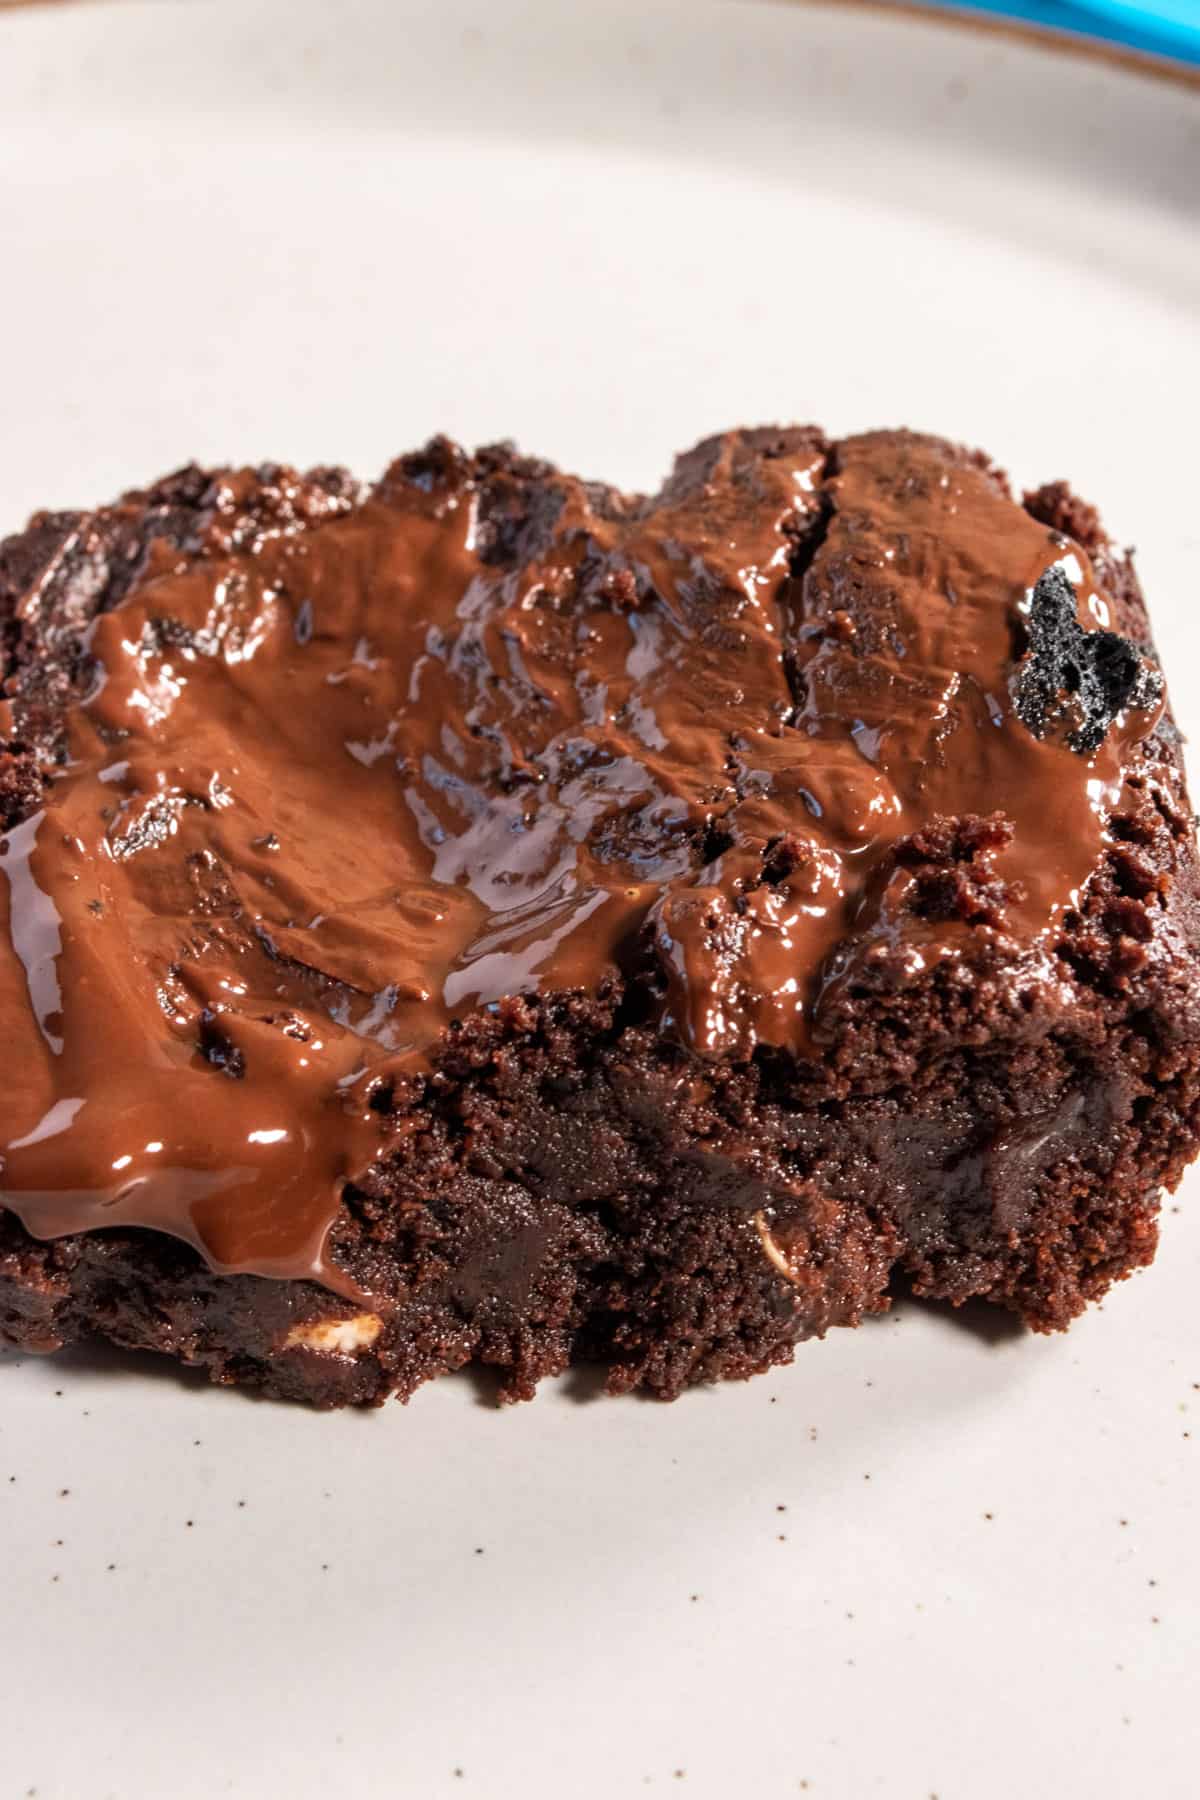 An extra fudgy slice of brownie. Chocolate drips down the side.